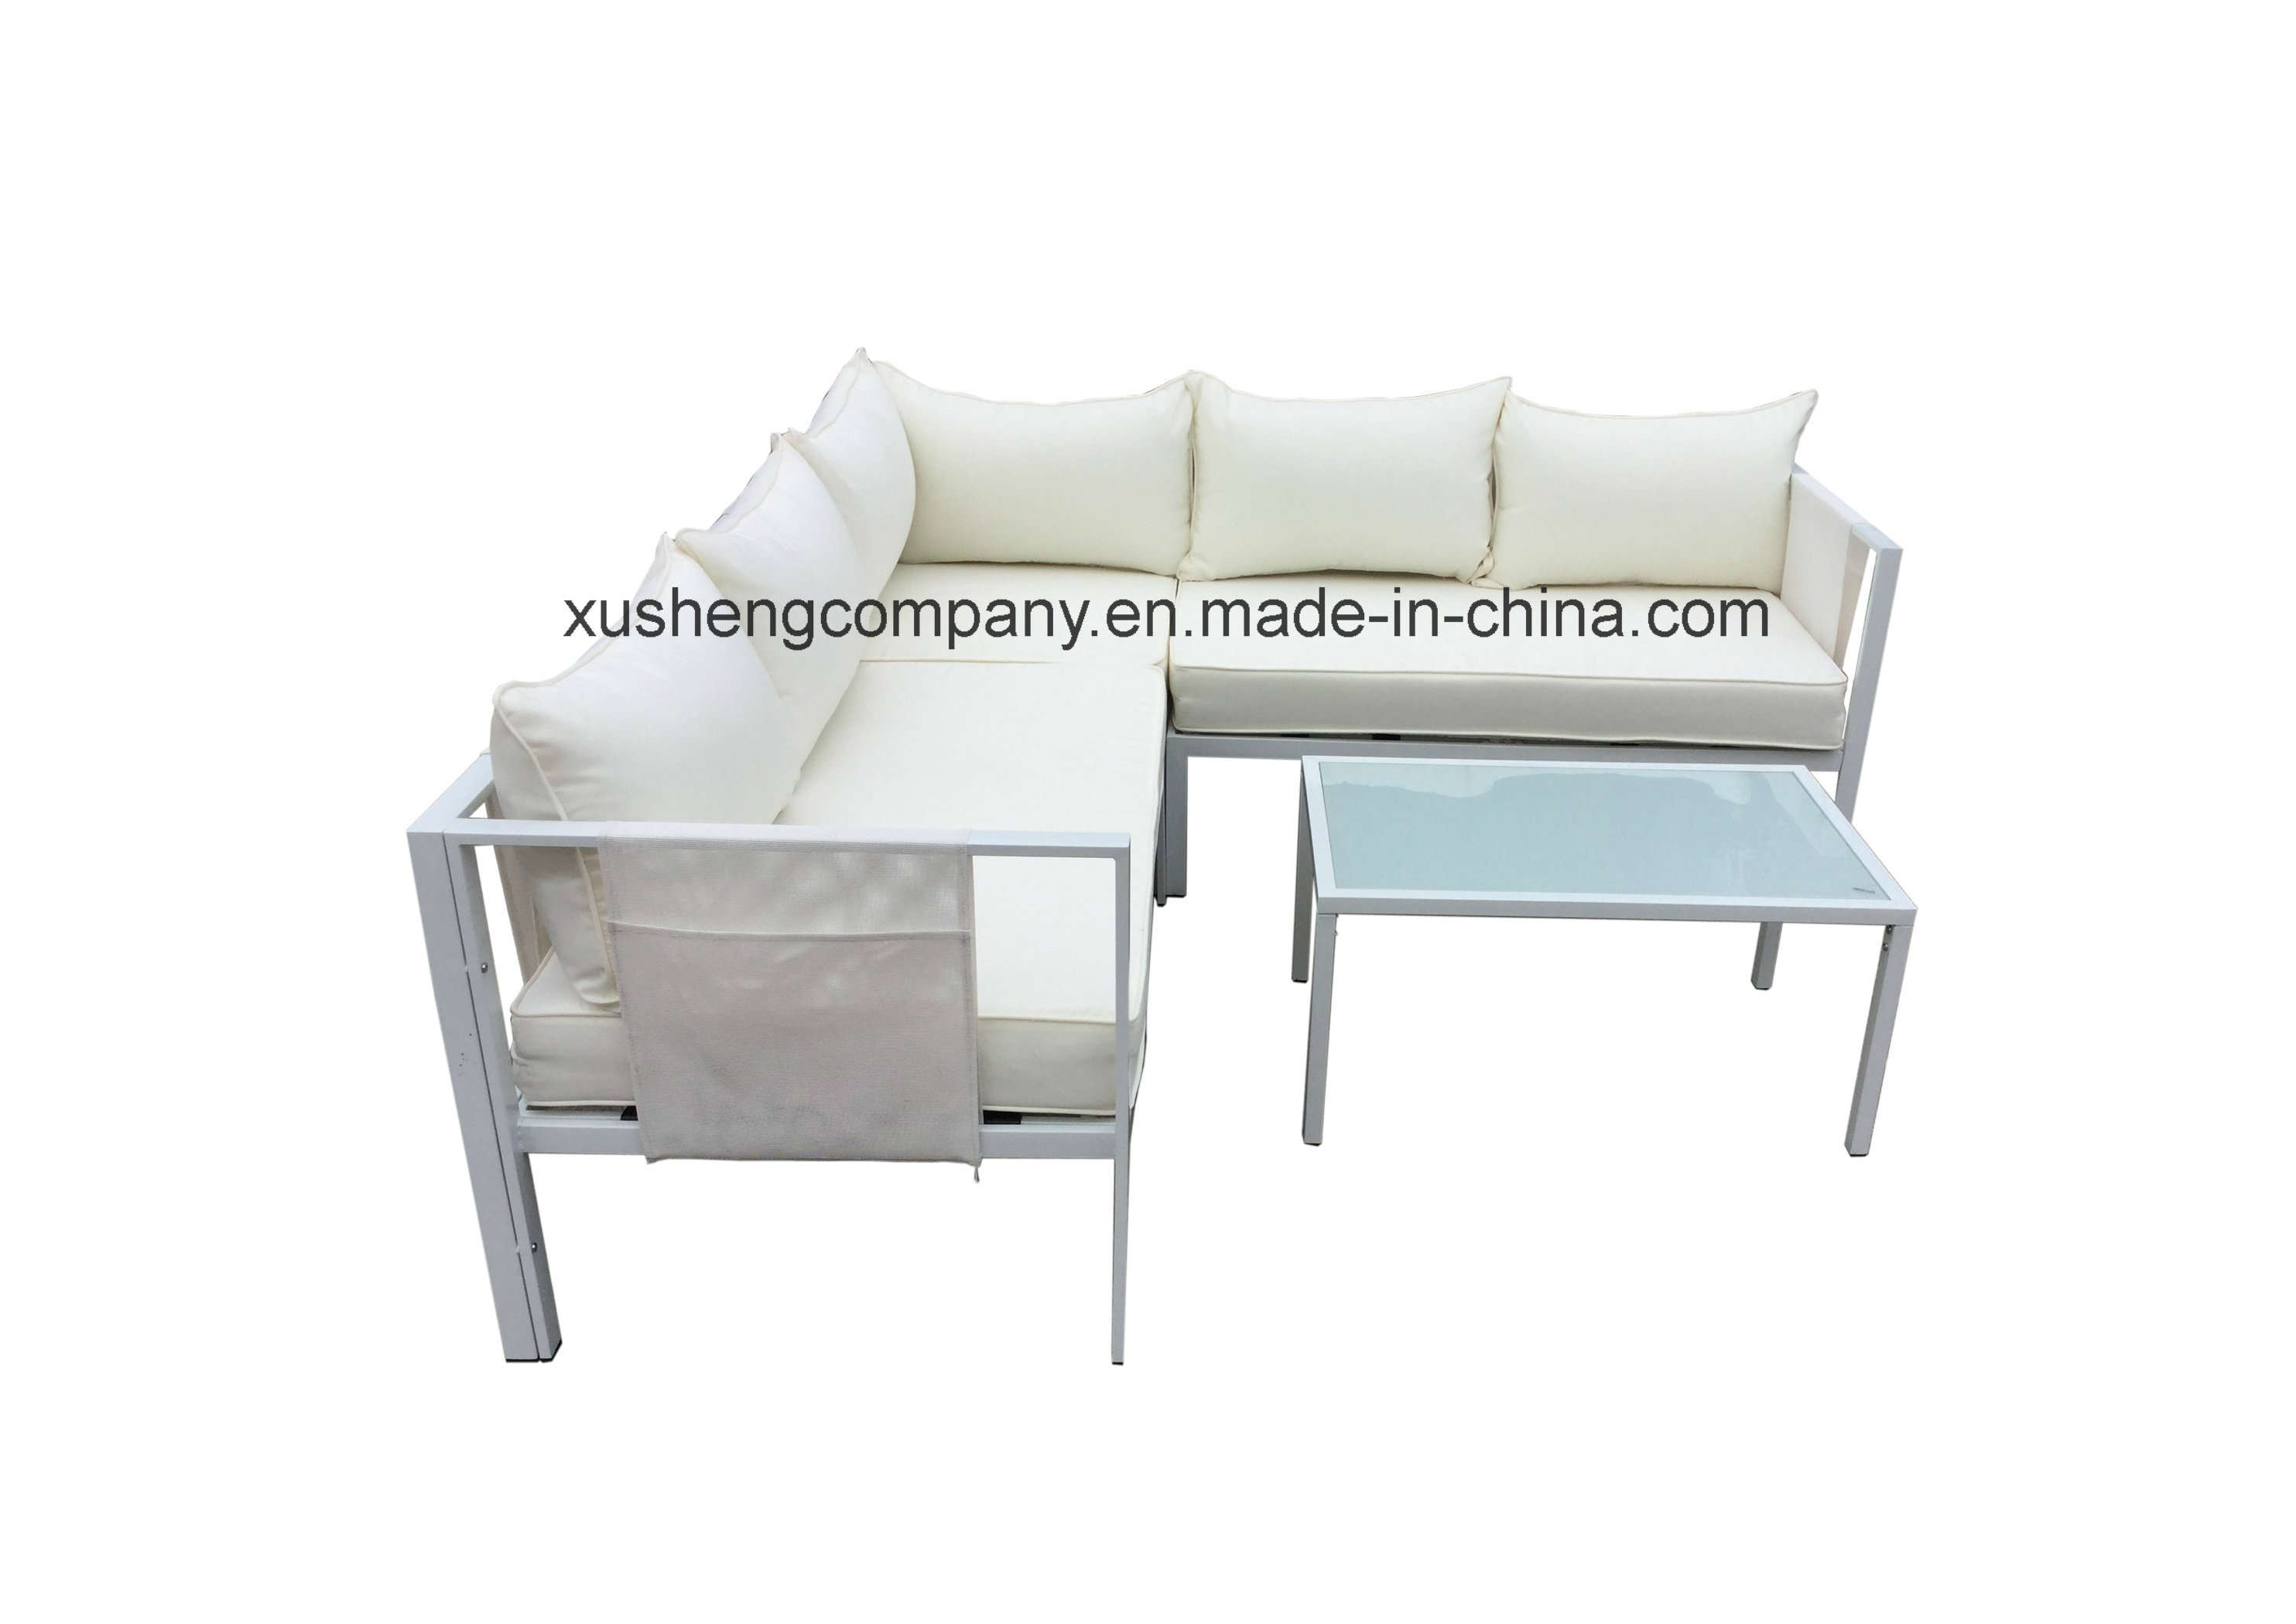 Stainless Steel Material and Modern Appearance Metal Sofa Set